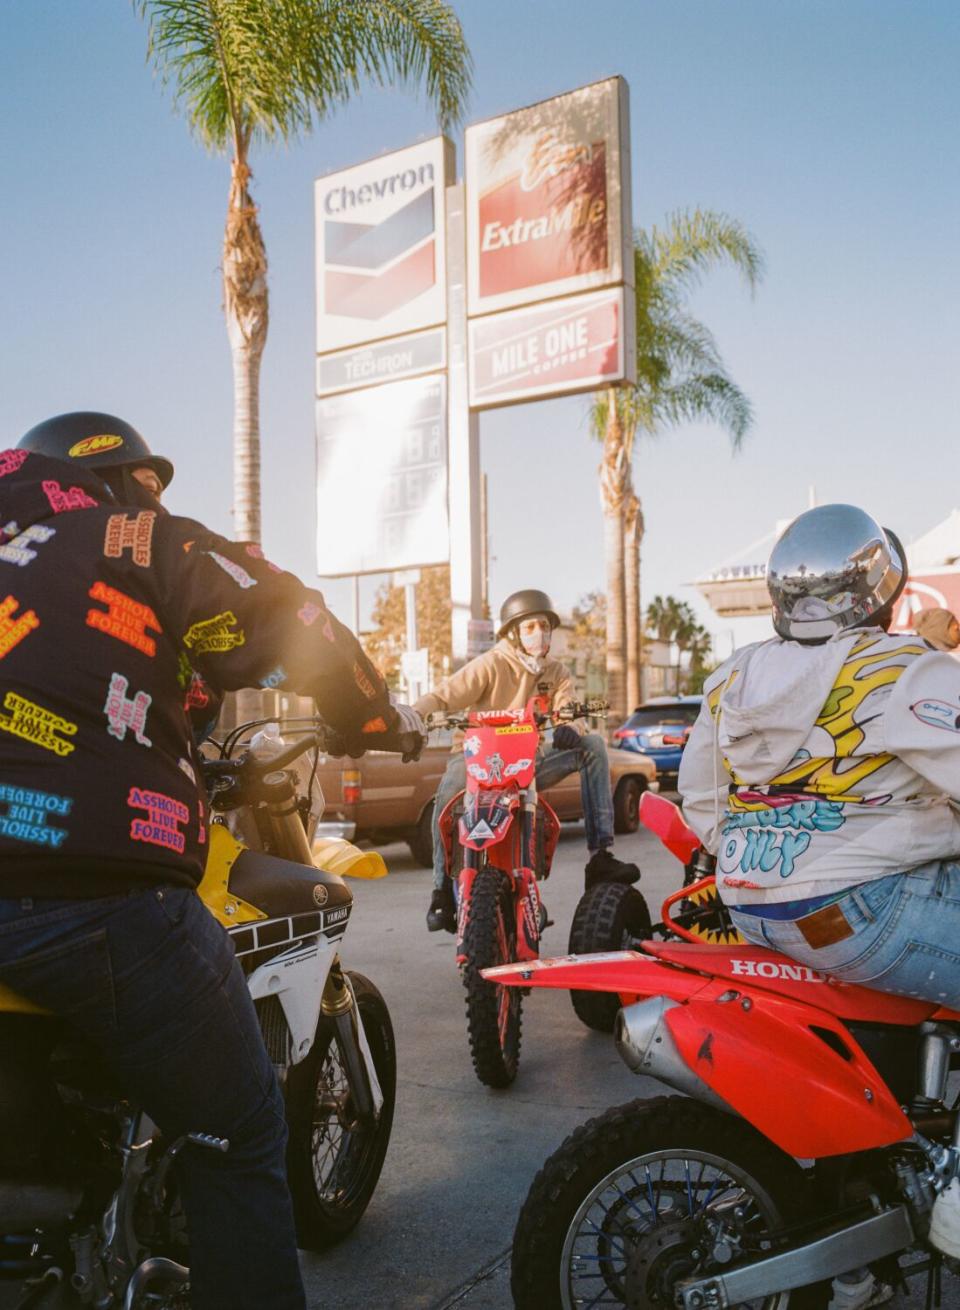 "Riding a dirt bike in the street, in the city, it's almost like a show," says Jay 305.